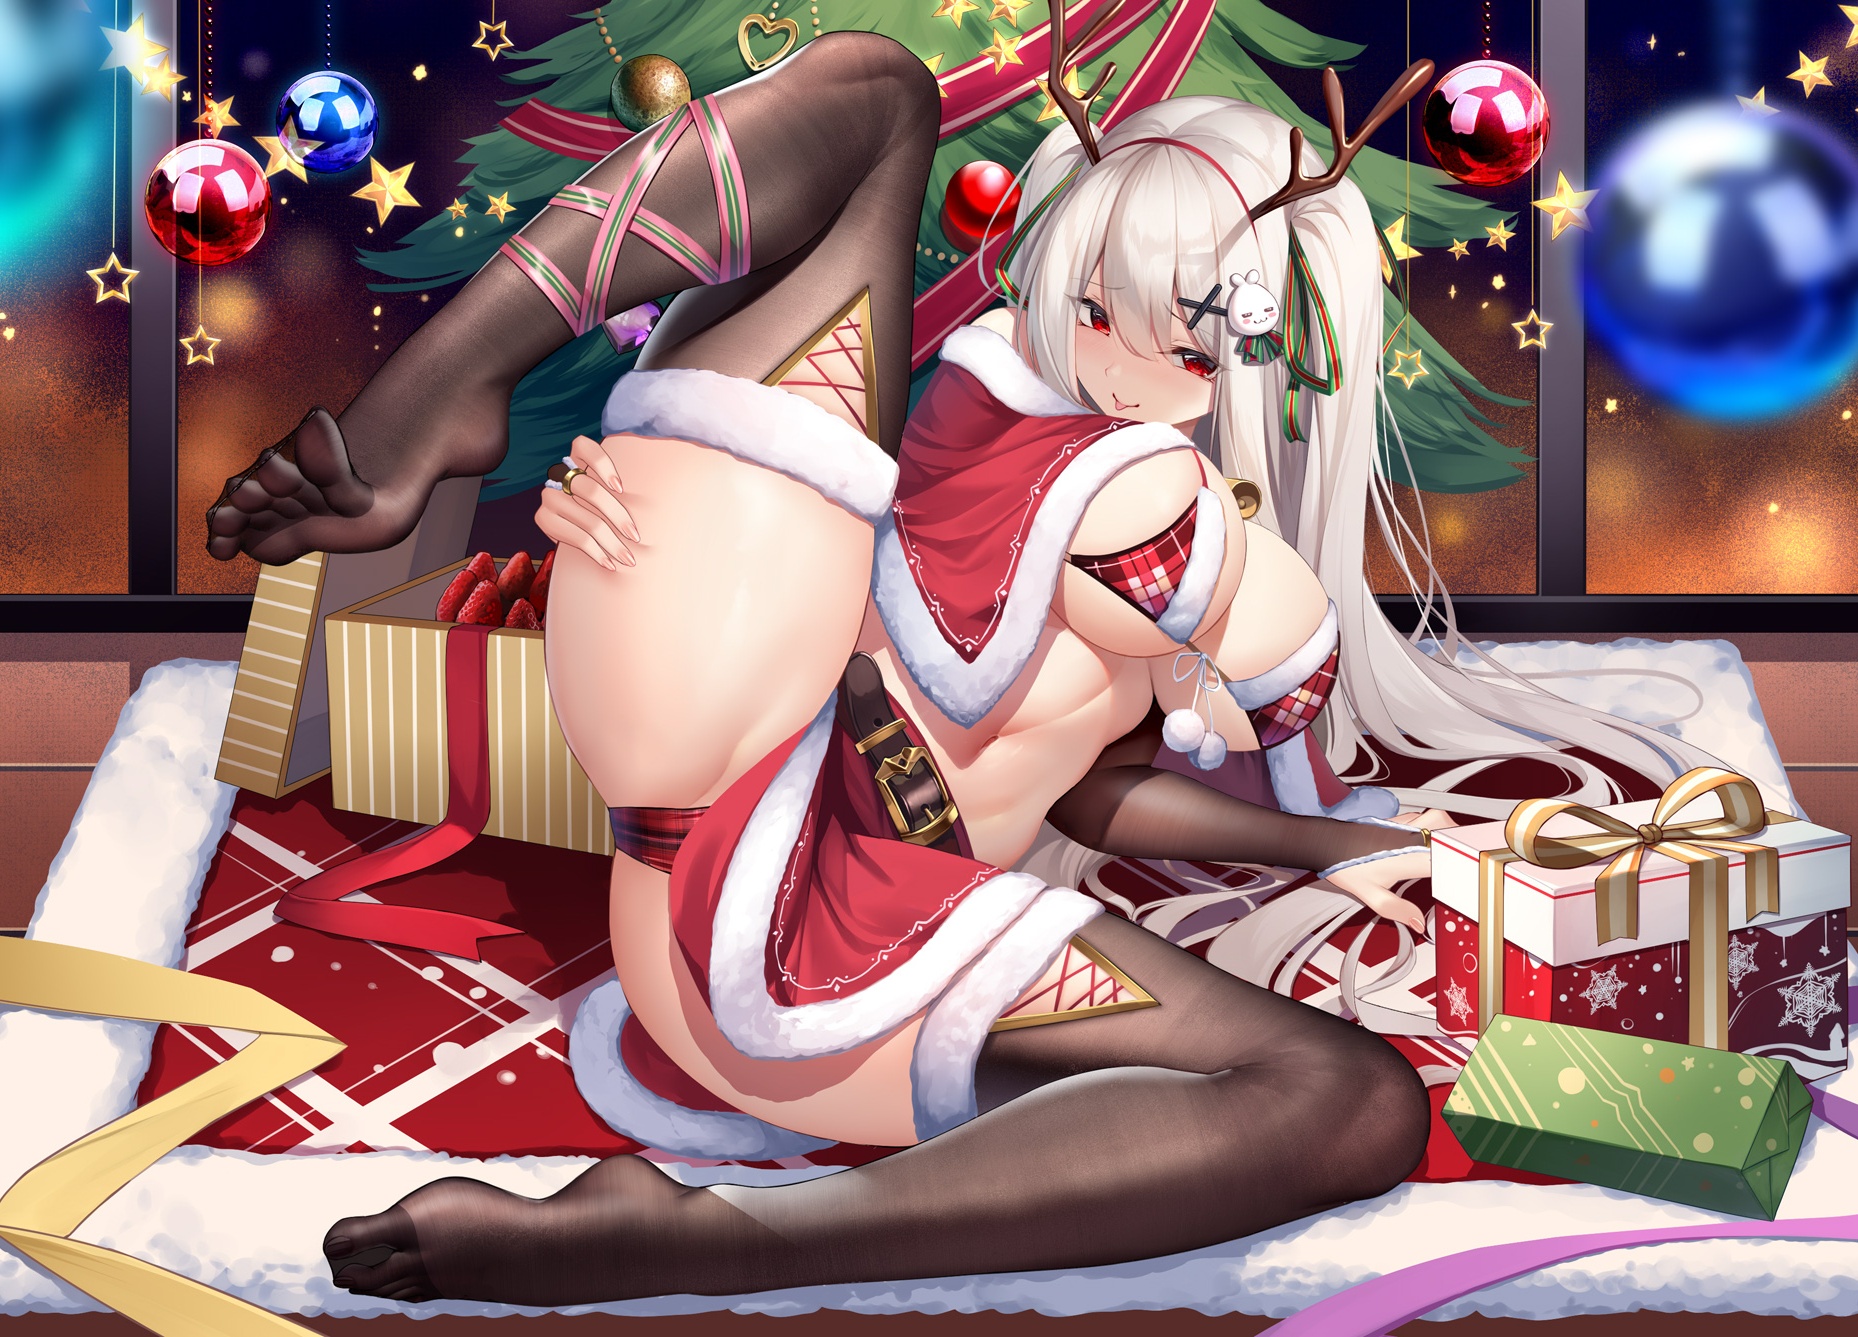 Anime 1858x1337 anime anime girls digital art artwork 2D portrait spread legs big boobs micro bikini thighs crotch floss wide hips feet foot fetishism toes legs white hair long hair red eyes belly belly button belt Christmas clothes Christmas Christmas ornaments  stockings stars presents thigh-highs MeIoN